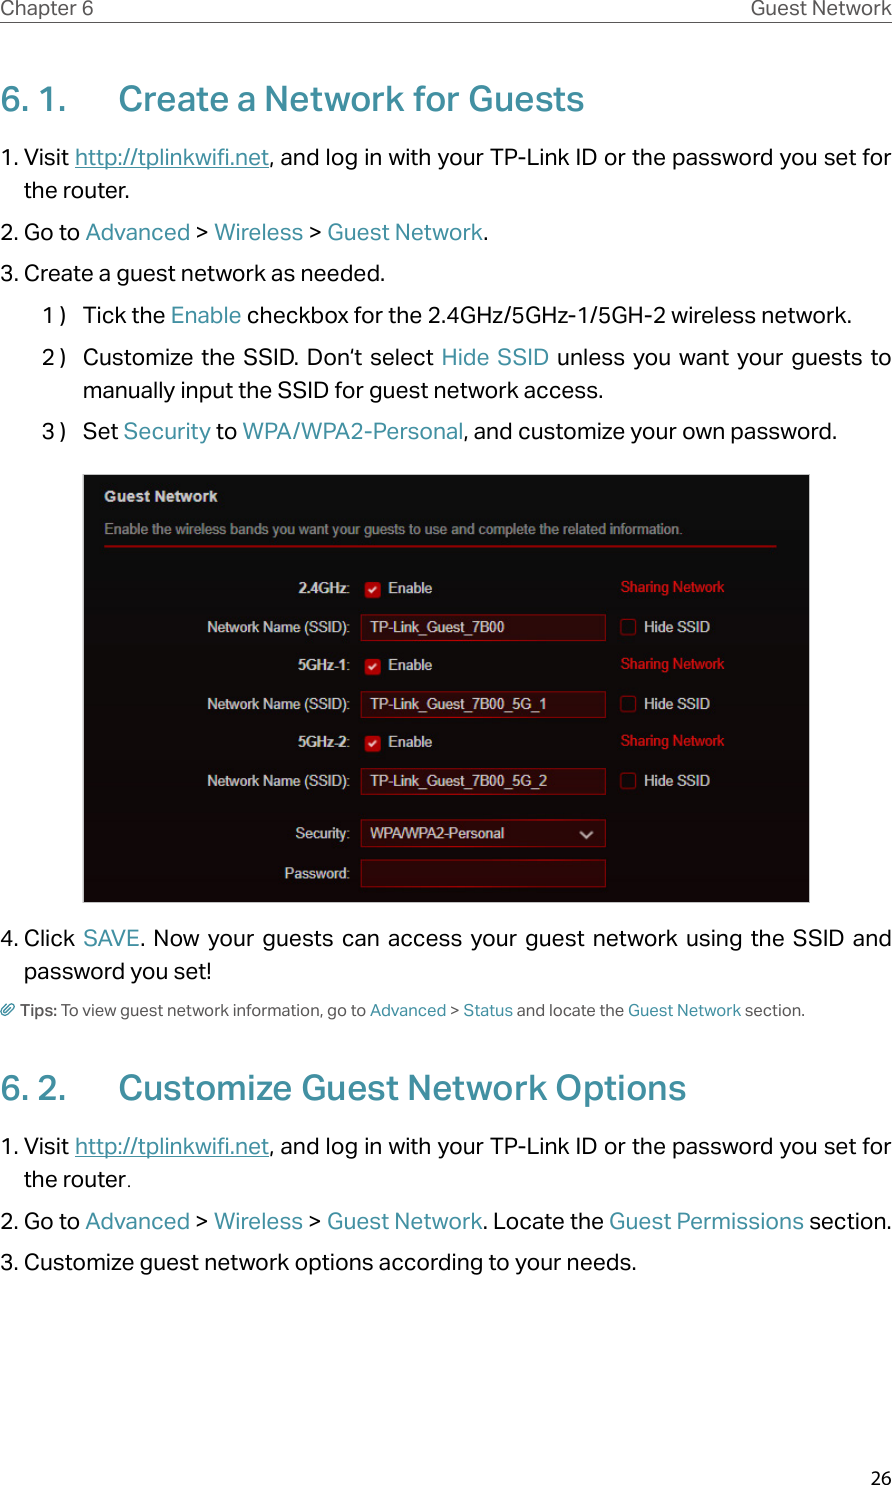 26Chapter 6 Guest Network6. 1.  Create a Network for Guests 1. Visit http://tplinkwifi.net, and log in with your TP-Link ID or the password you set for the router.2. Go to Advanced &gt; Wireless &gt; Guest Network.3. Create a guest network as needed.1 )  Tick the Enable checkbox for the 2.4GHz/5GHz-1/5GH-2 wireless network.2 )  Customize the SSID. Don‘t select Hide SSID unless you want your guests to manually input the SSID for guest network access.3 )  Set Security to WPA/WPA2-Personal, and customize your own password. 4. Click  SAVE. Now your guests can access your guest network using the SSID and password you set!Tips: To view guest network information, go to Advanced &gt; Status and locate the Guest Network section.6. 2.  Customize Guest Network Options1. Visit http://tplinkwifi.net, and log in with your TP-Link ID or the password you set for the router.2. Go to Advanced &gt; Wireless &gt; Guest Network. Locate the Guest Permissions section.3. Customize guest network options according to your needs.